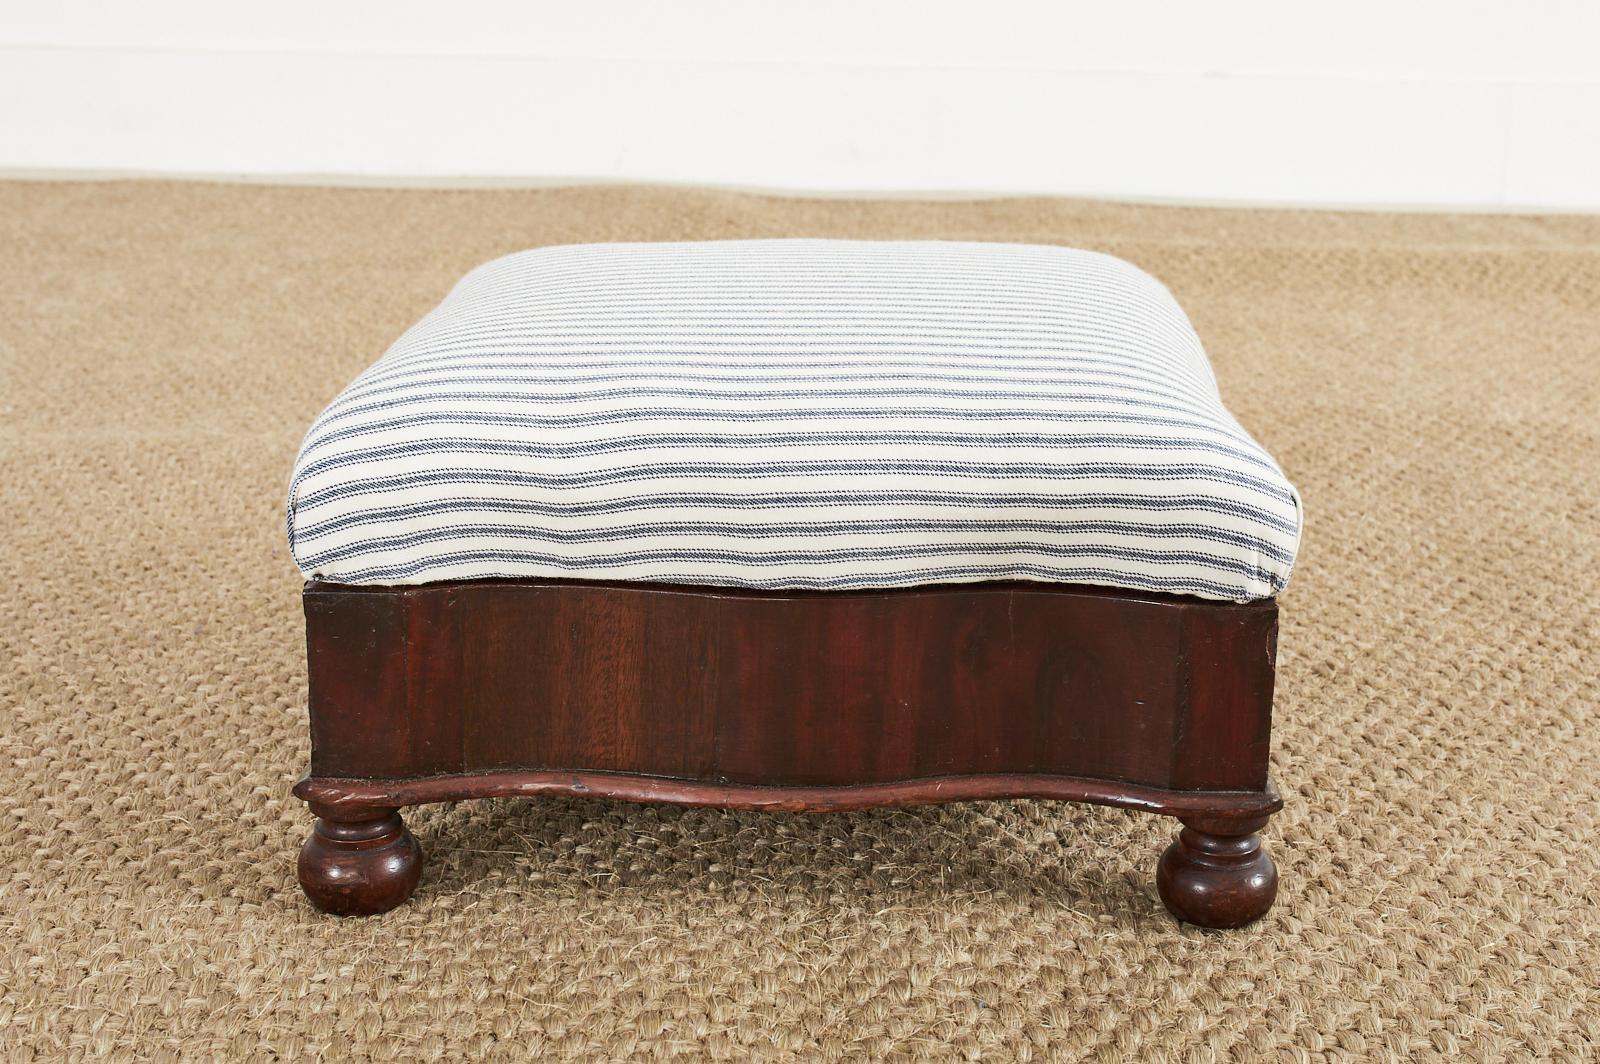 Hand-Crafted 19th Century American Empire Mahogany Footstool with Storage